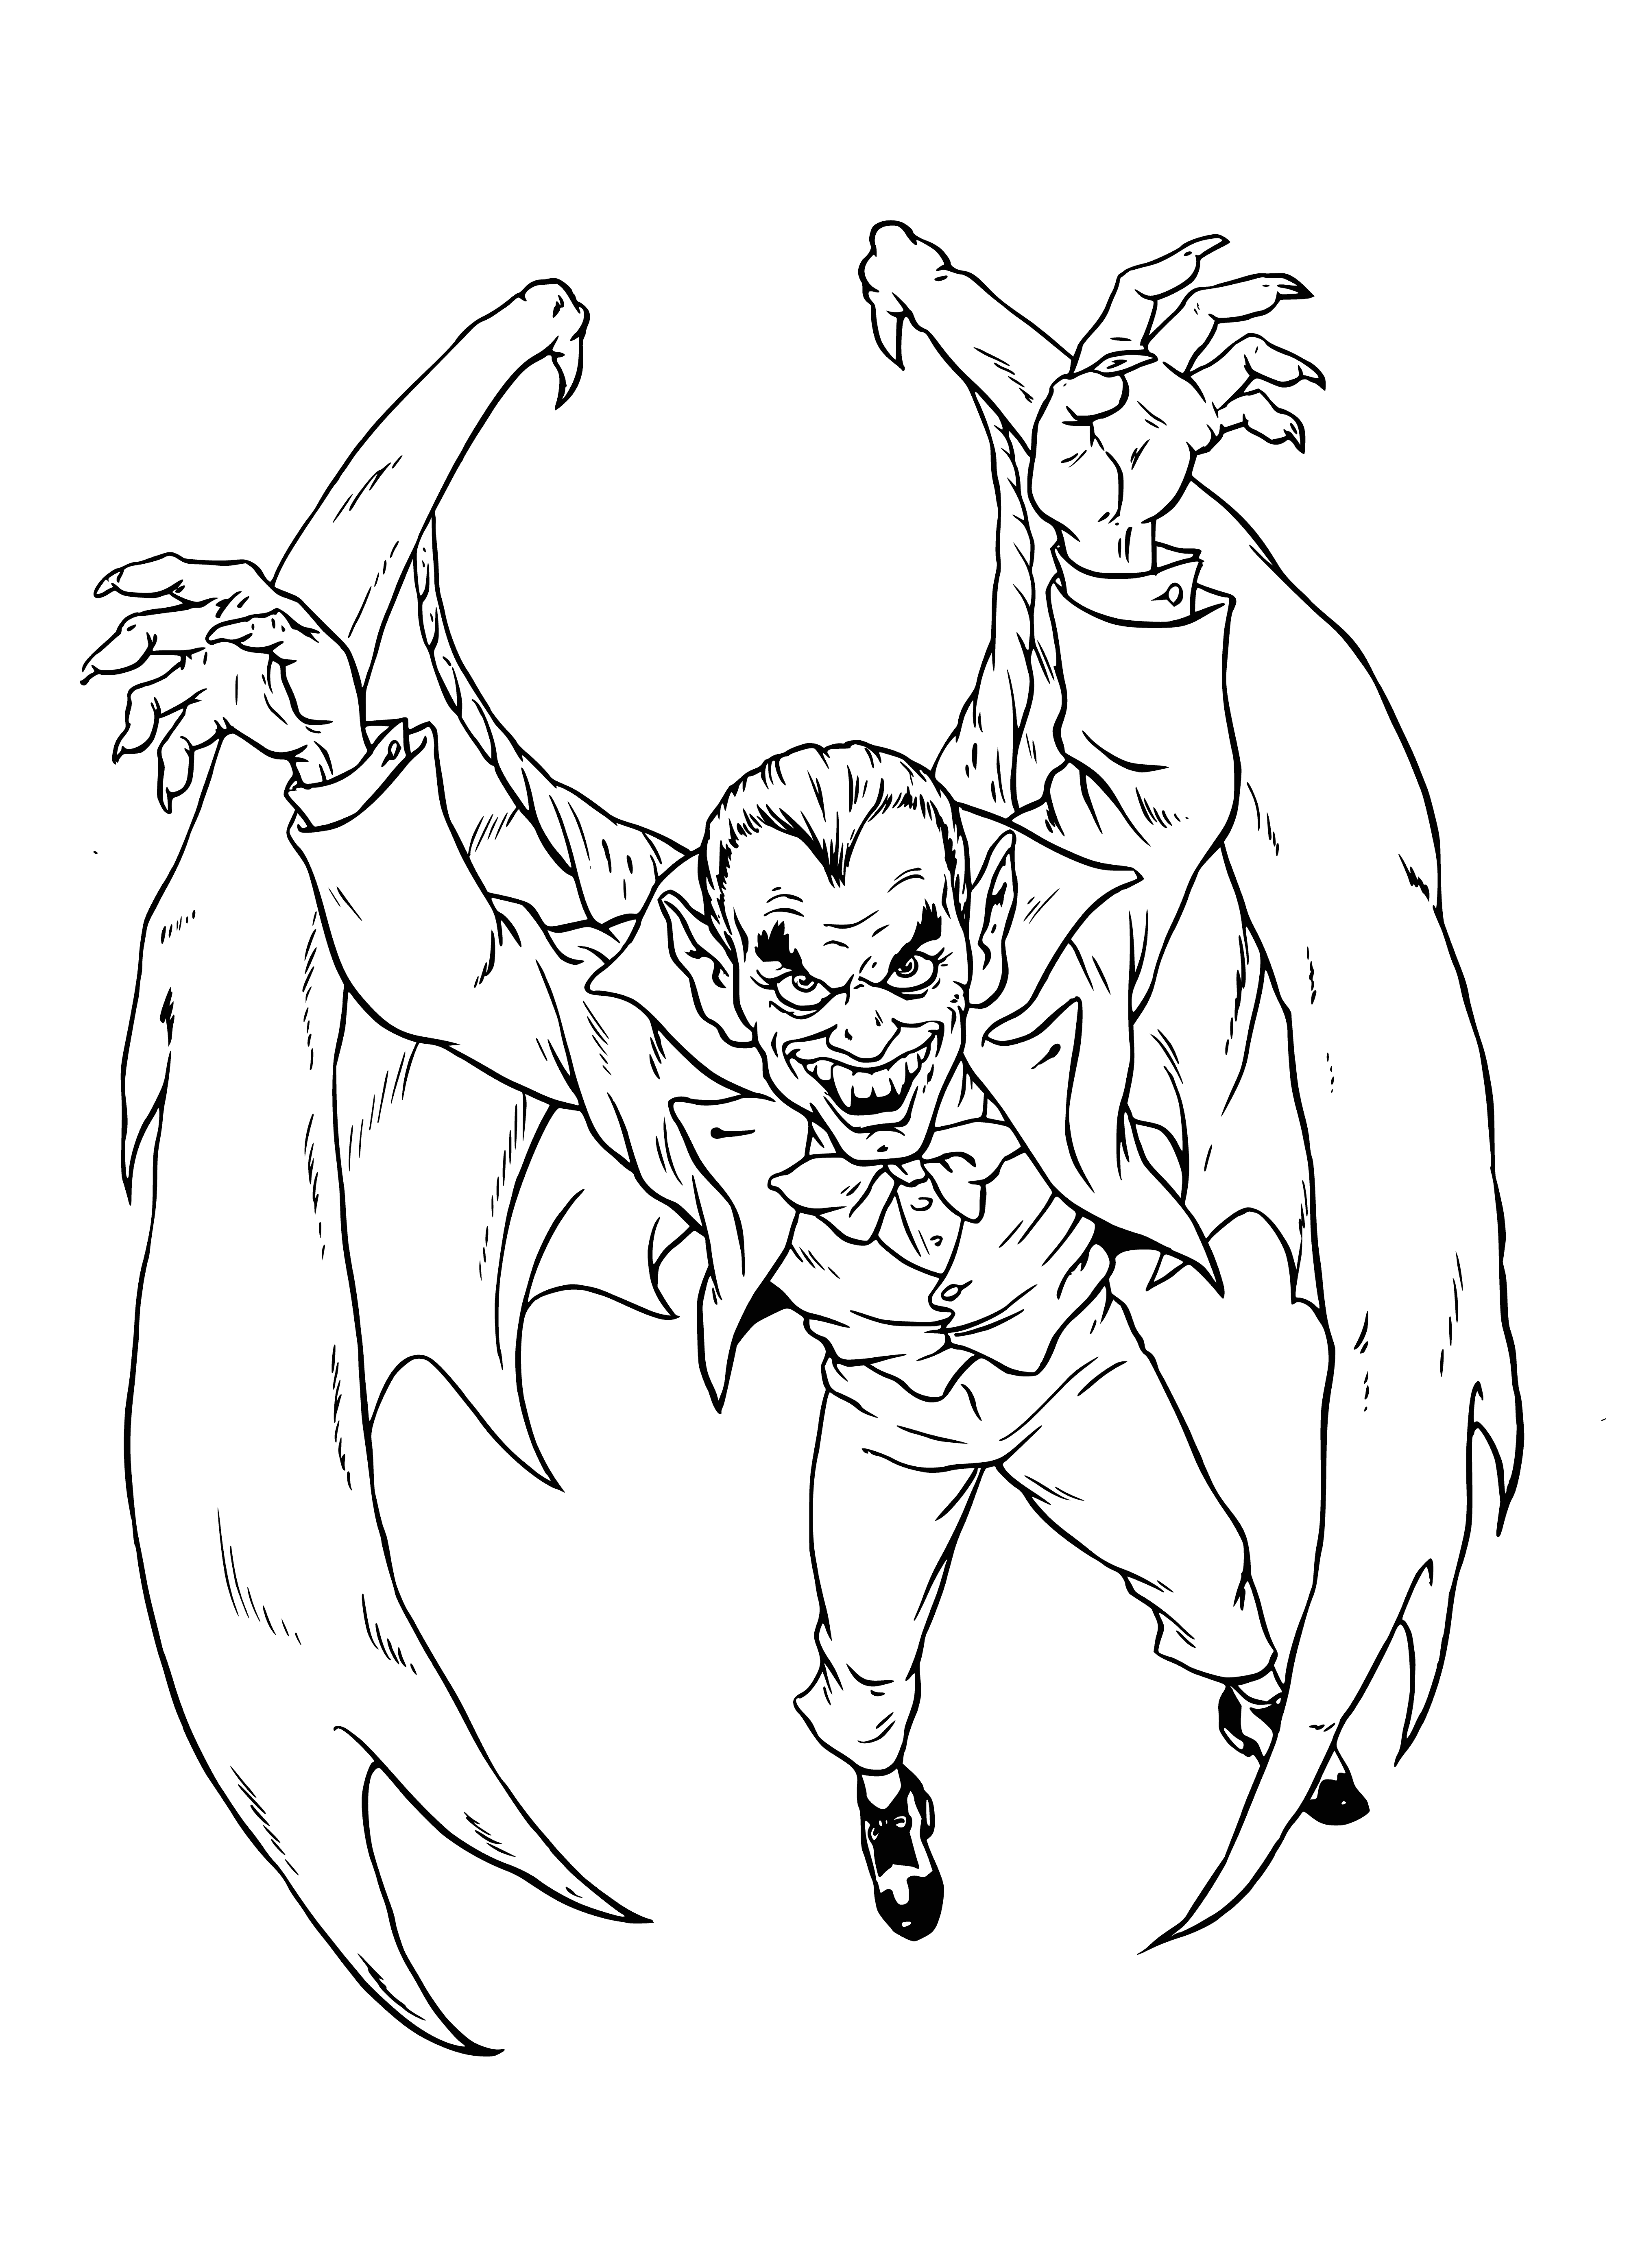 coloring page: A tall vampire in black cloak and trousers, wielding a wooden stake, ready to fight - or feast.